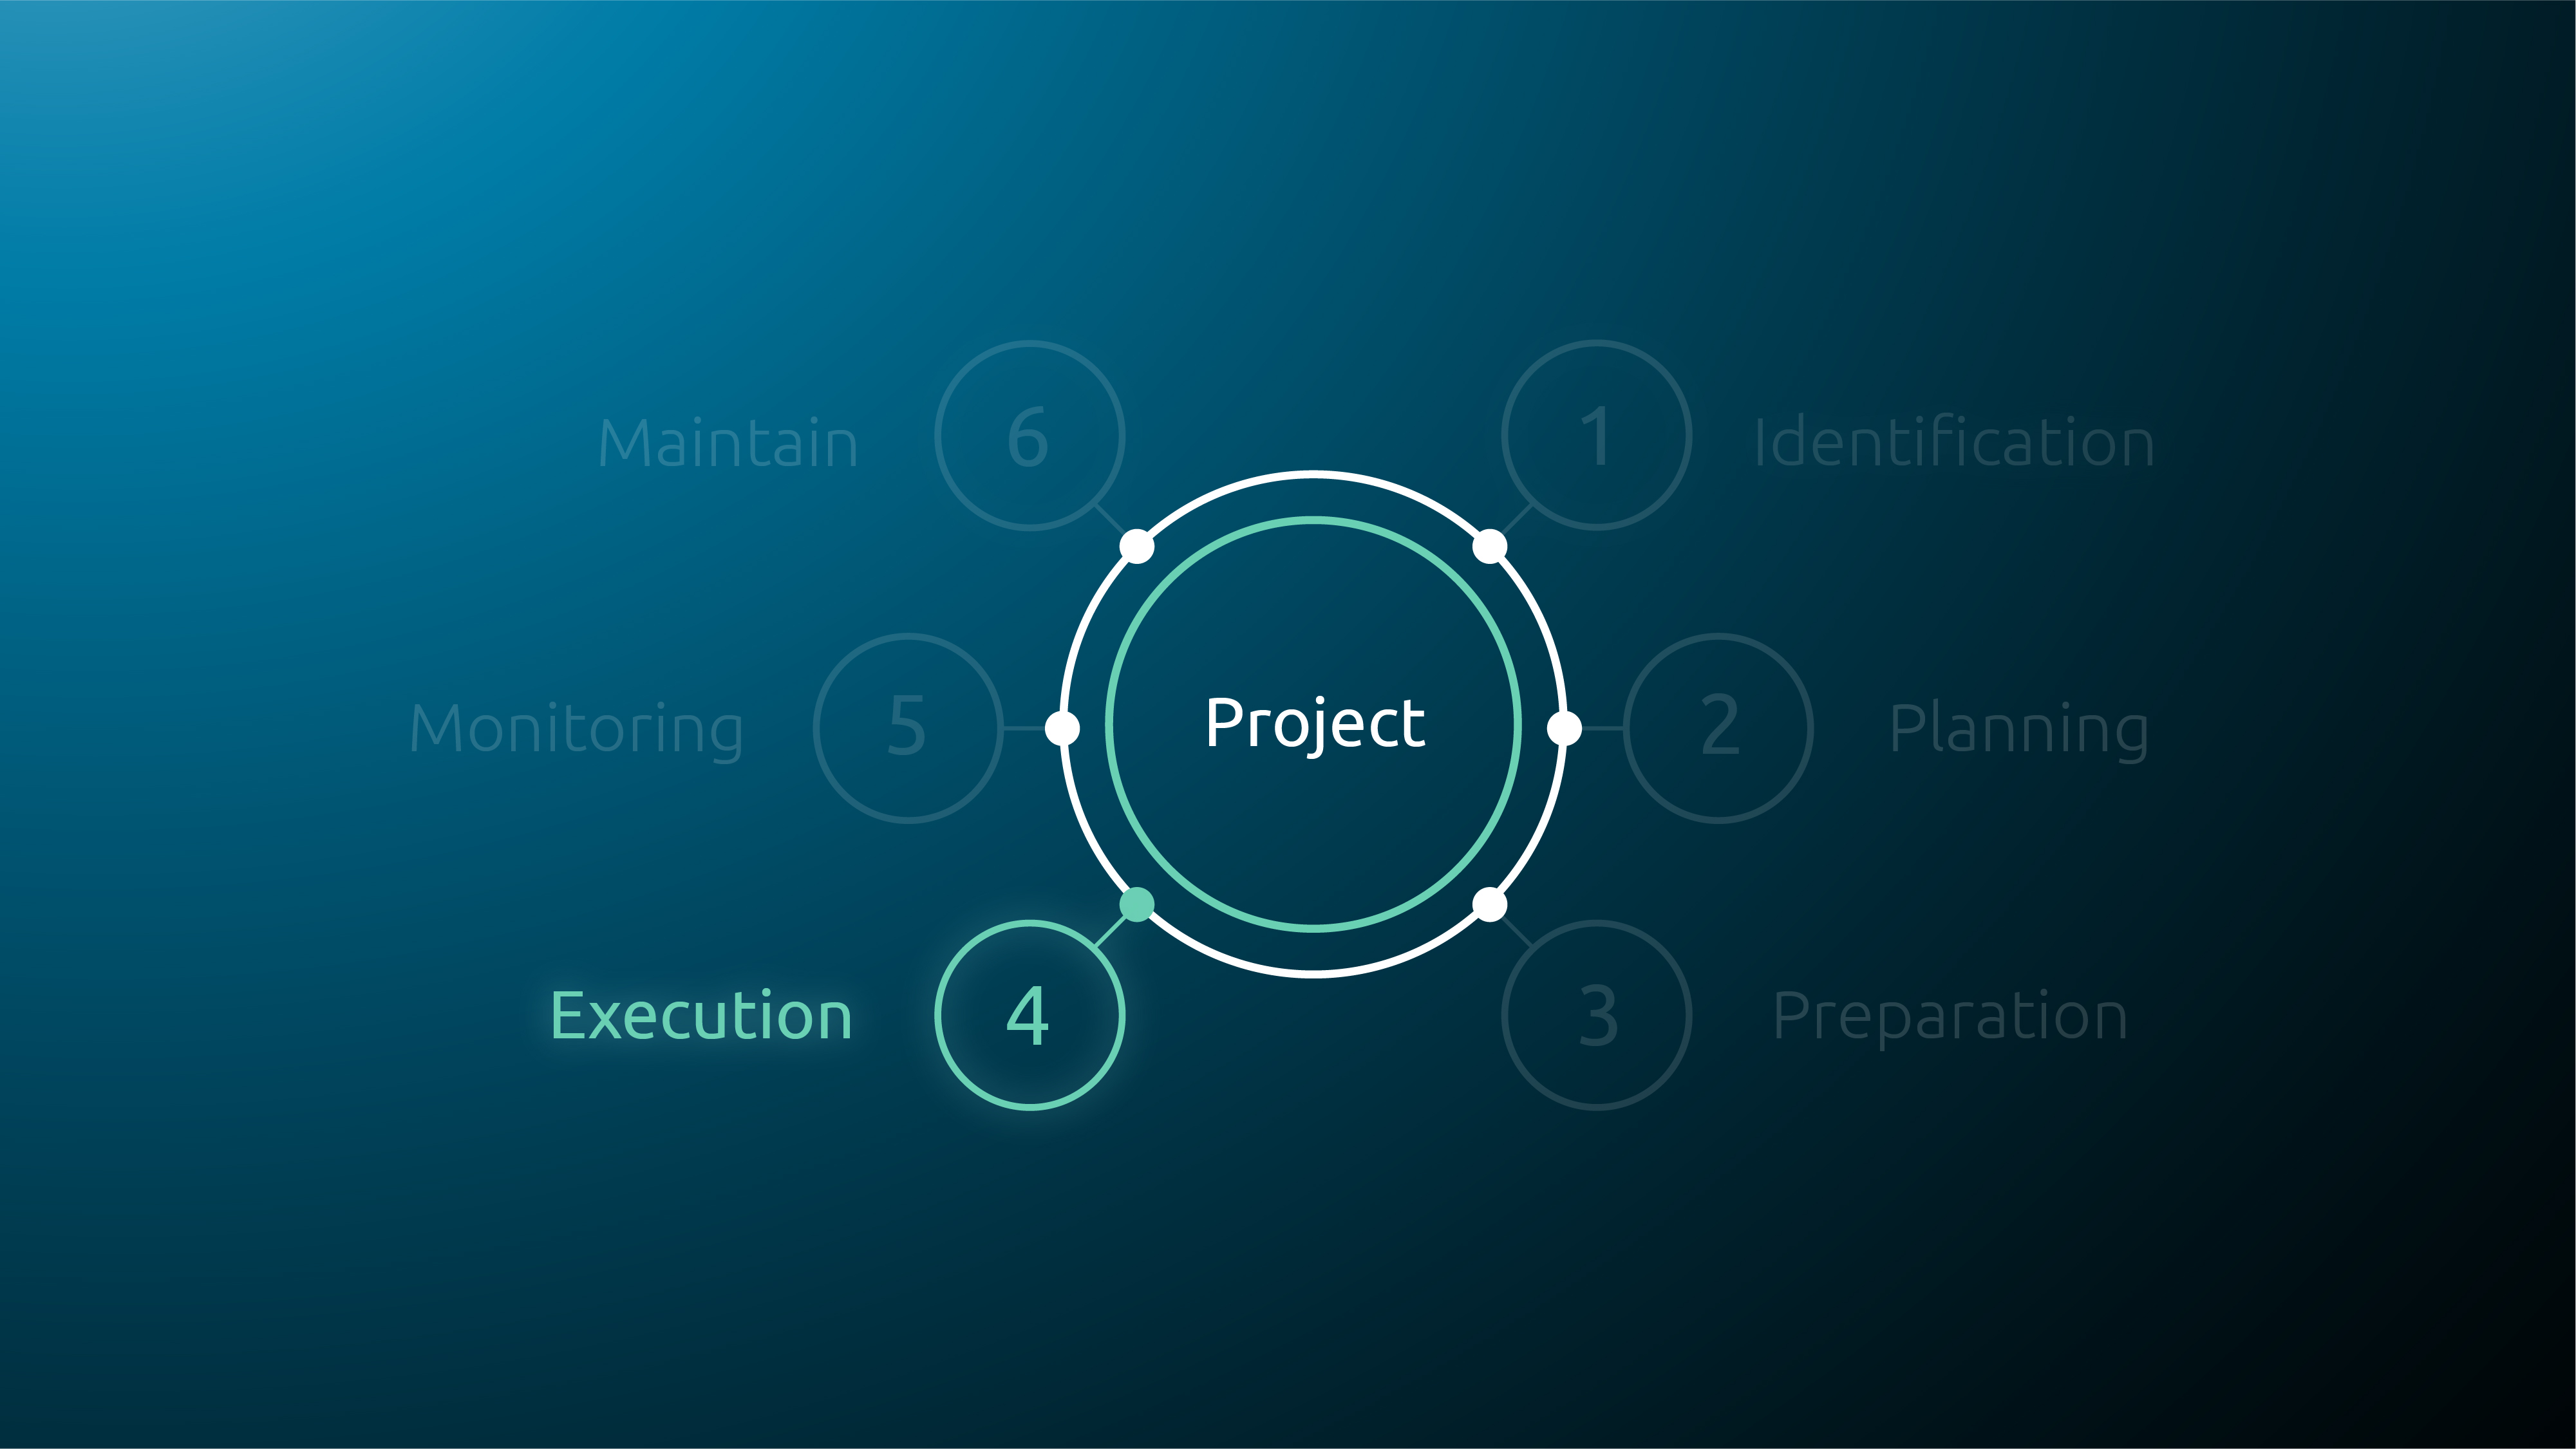 Stage 4 of project: execution